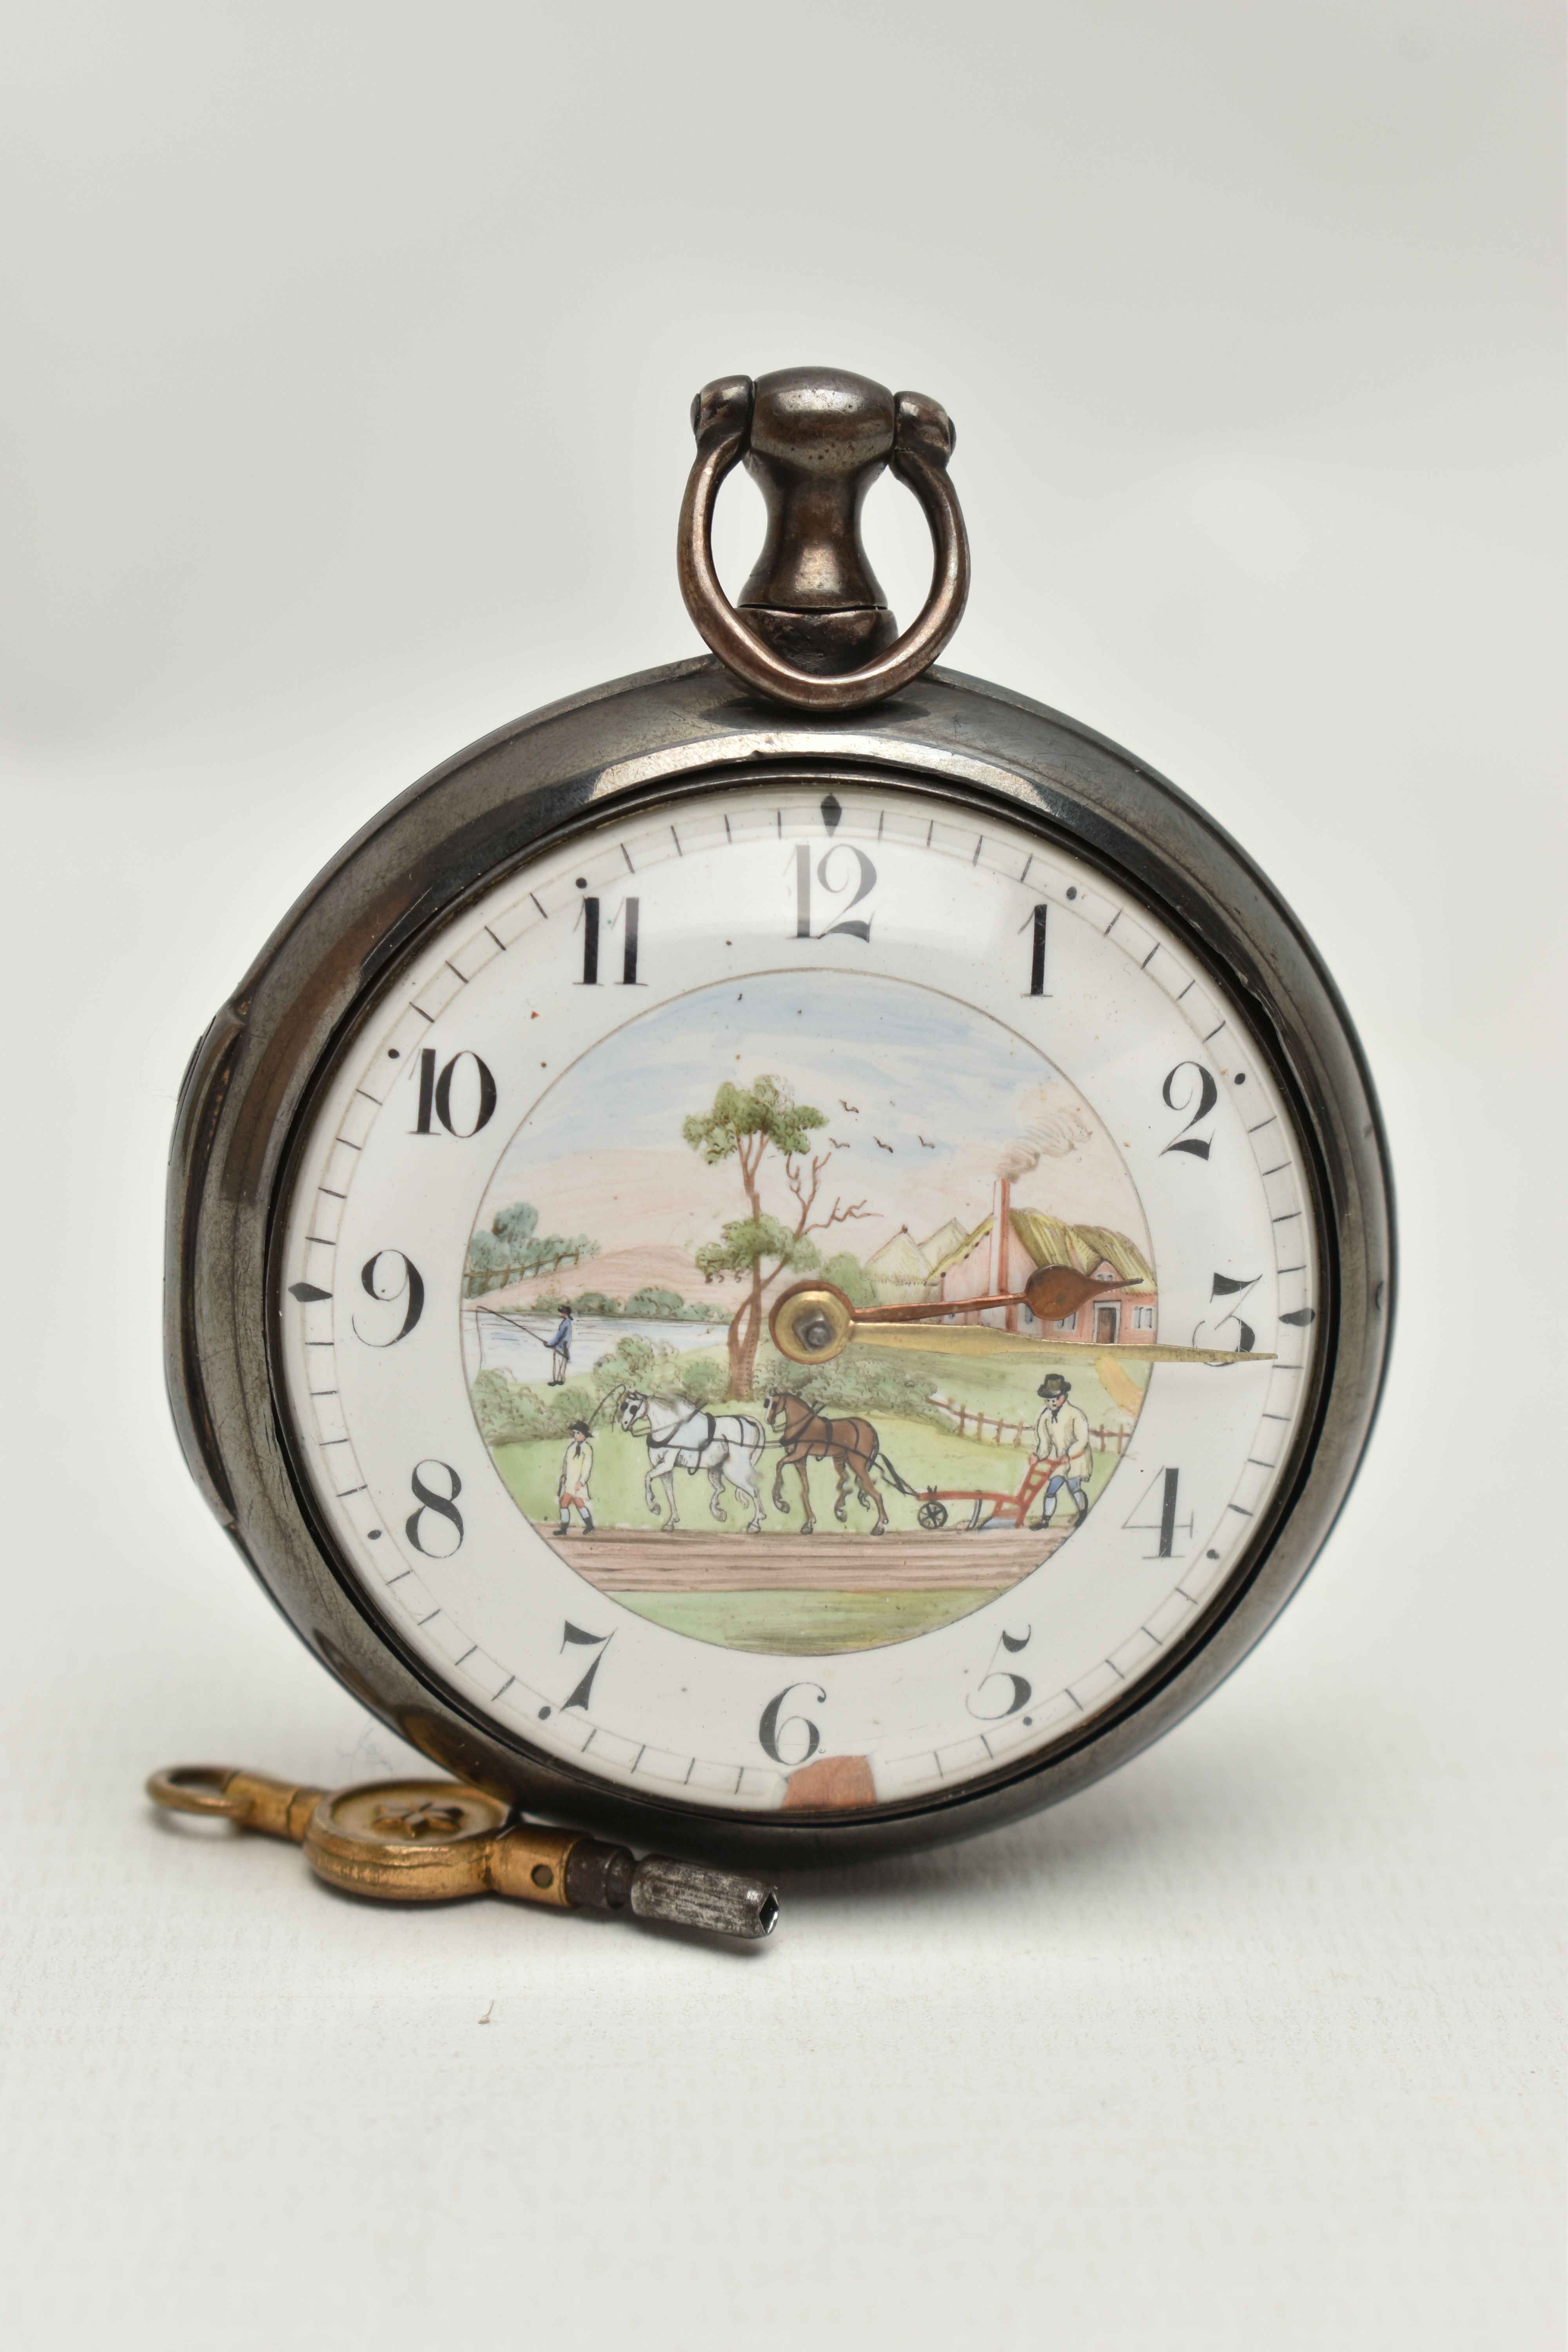 A GEORGE III SILVER PAIR CASED POCKET WATCH, the white enamel dial with Arabic numerals, painted